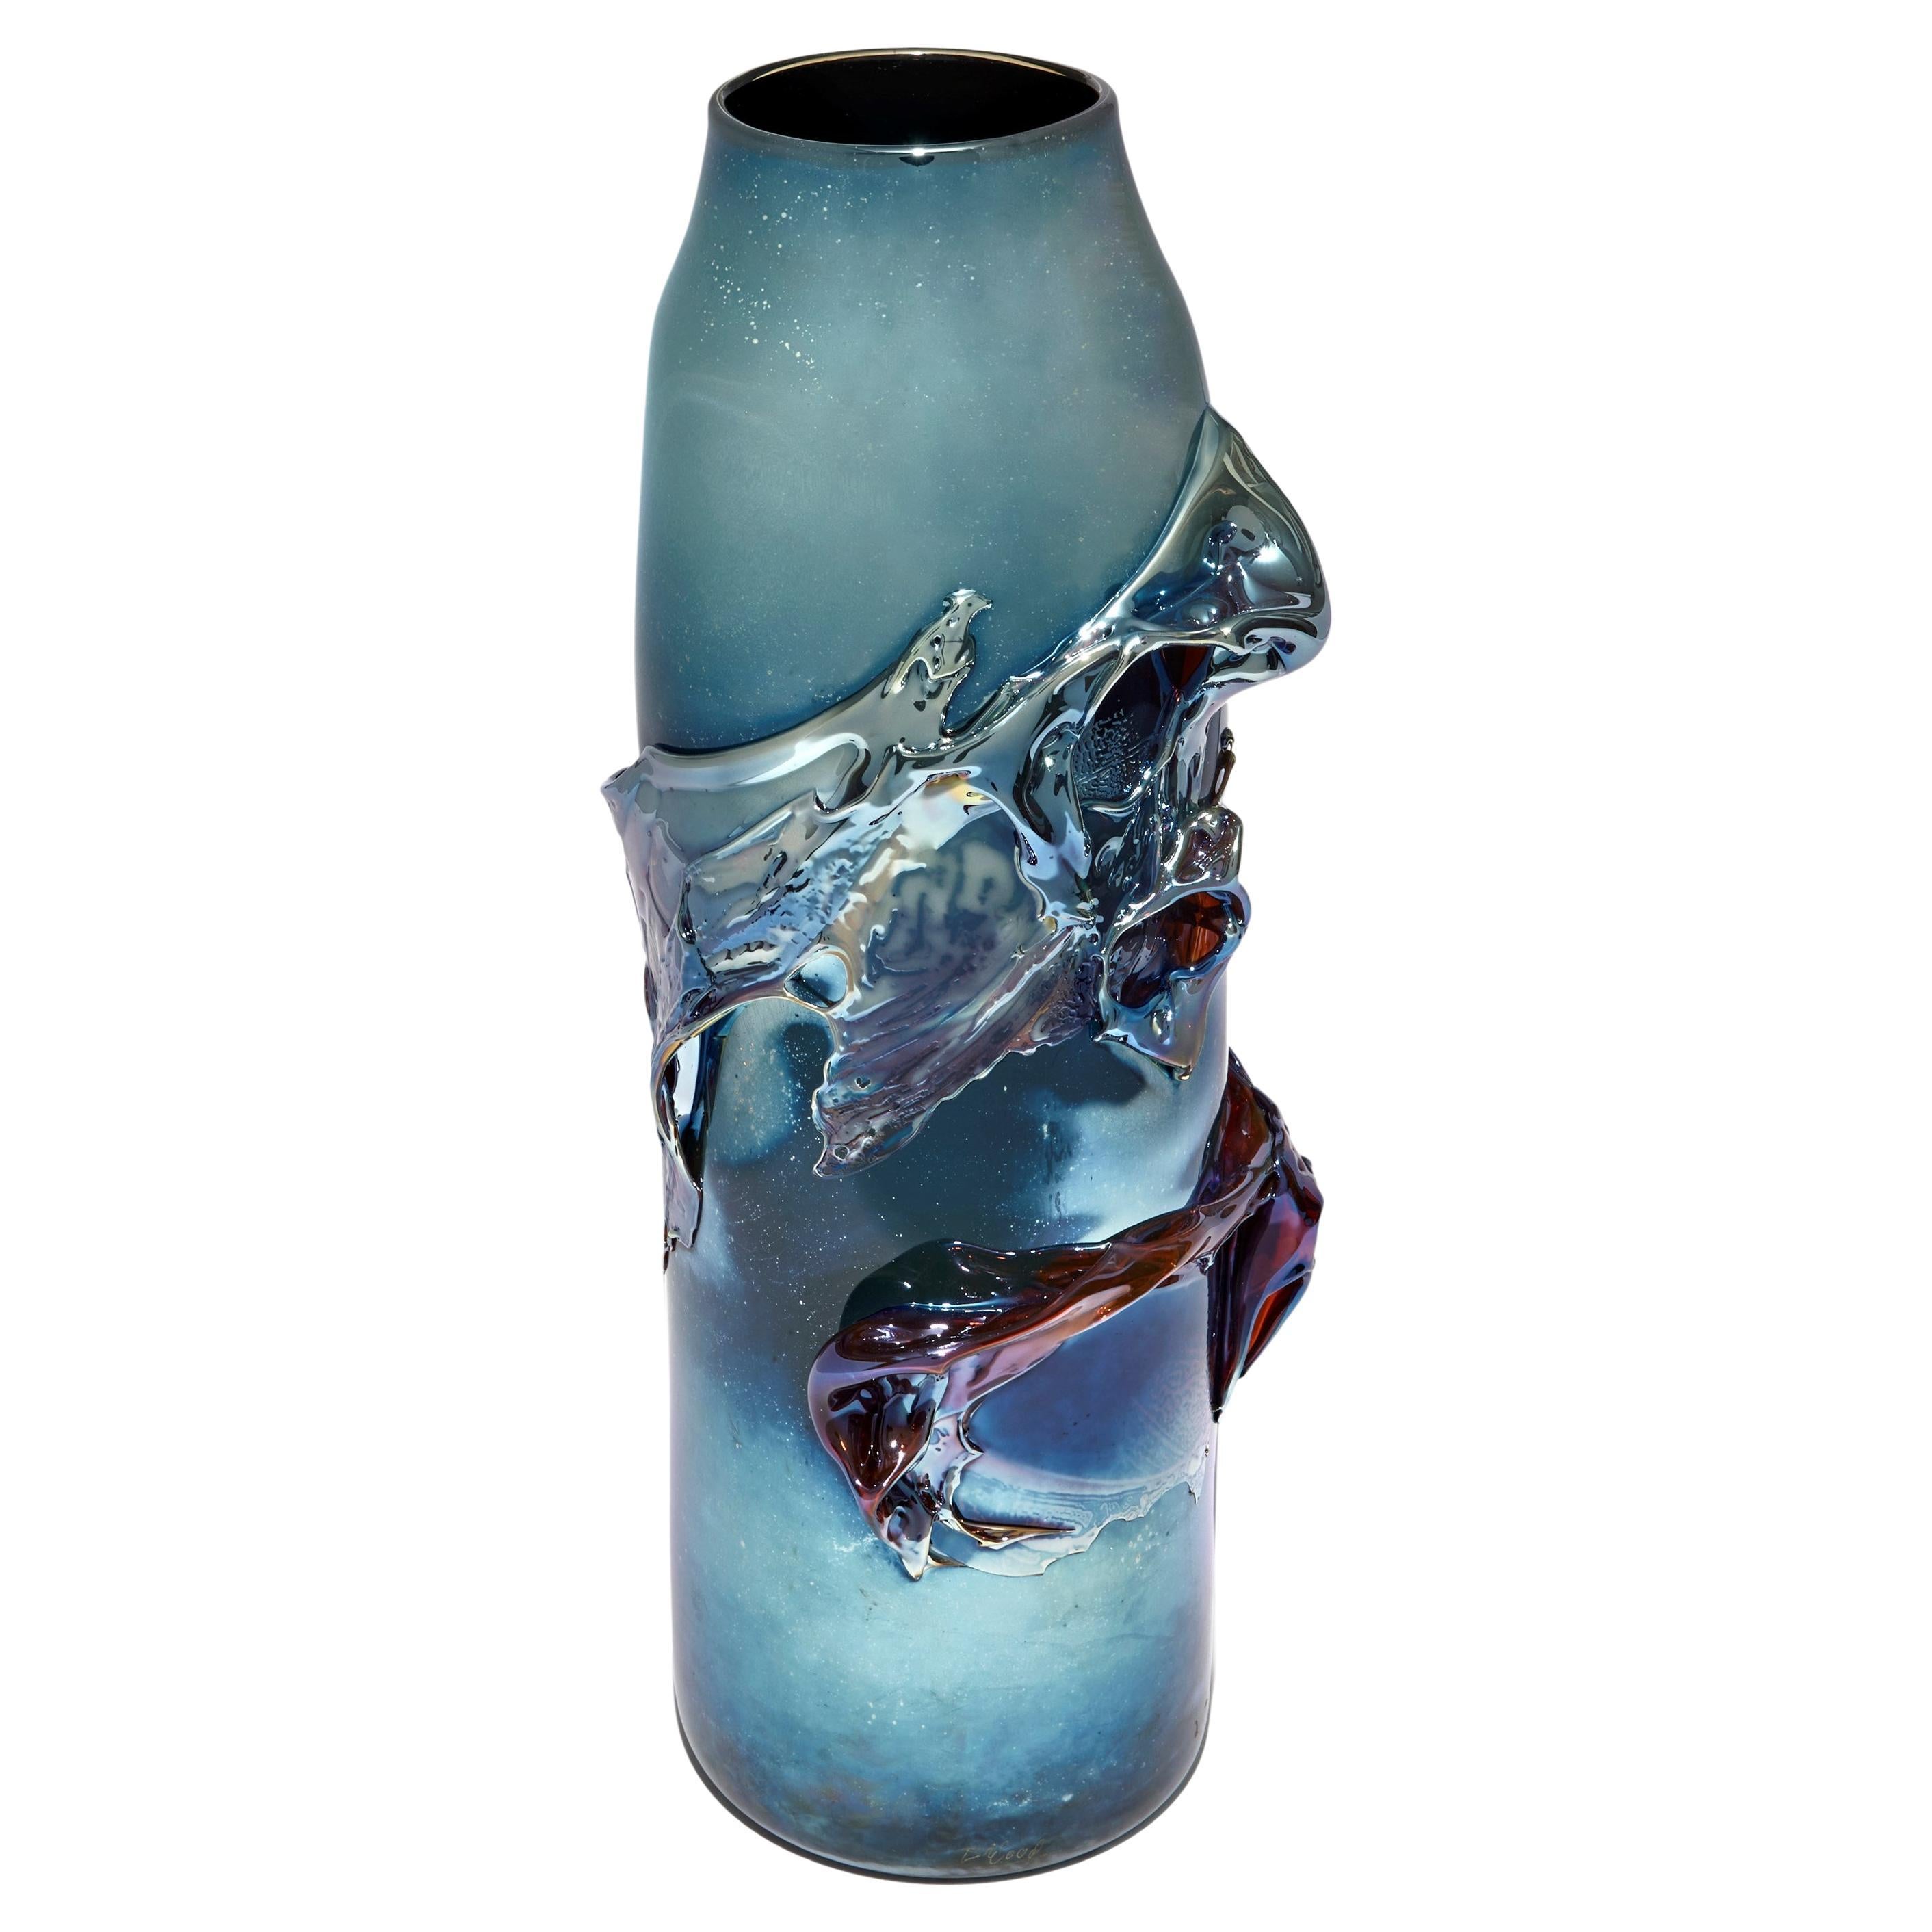  Panorama in Blue Mirror, an Abstract Textured Glass Vase by Bethany Wood